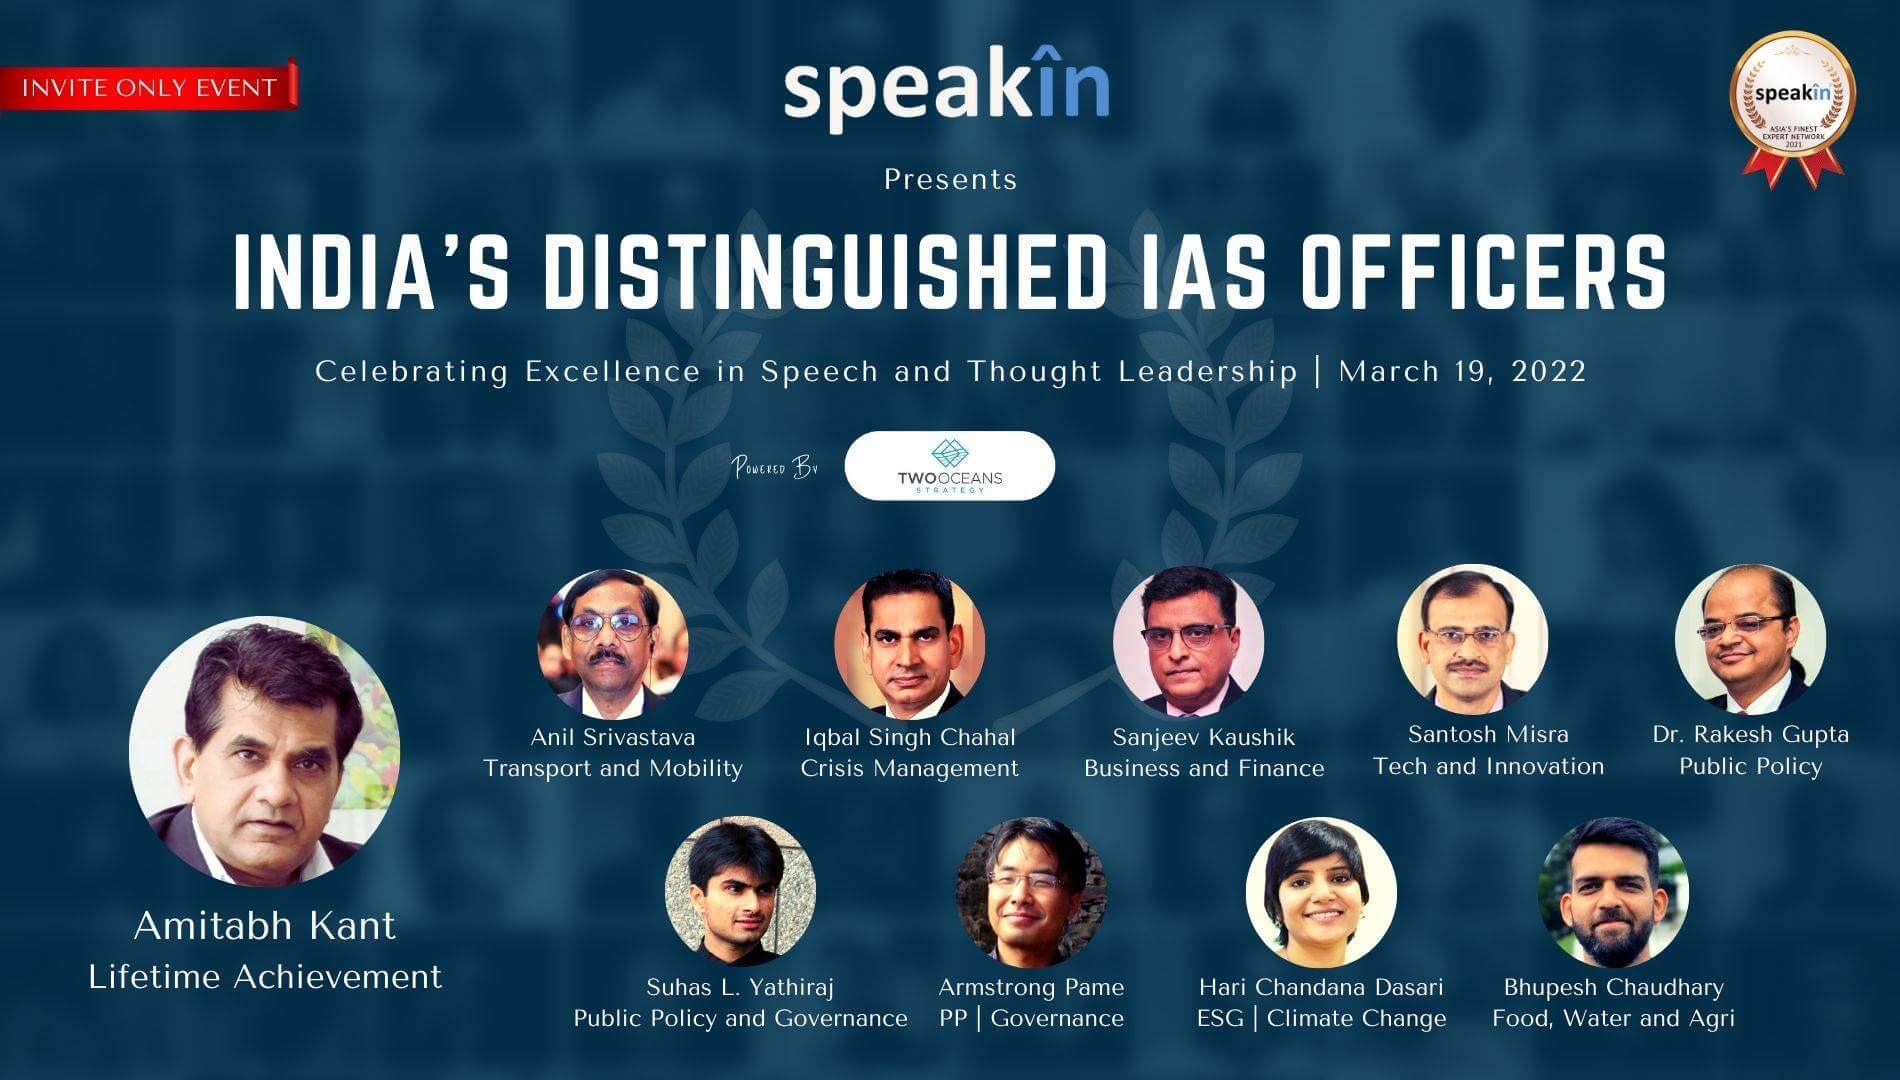 India's Distinguished IAS Officers